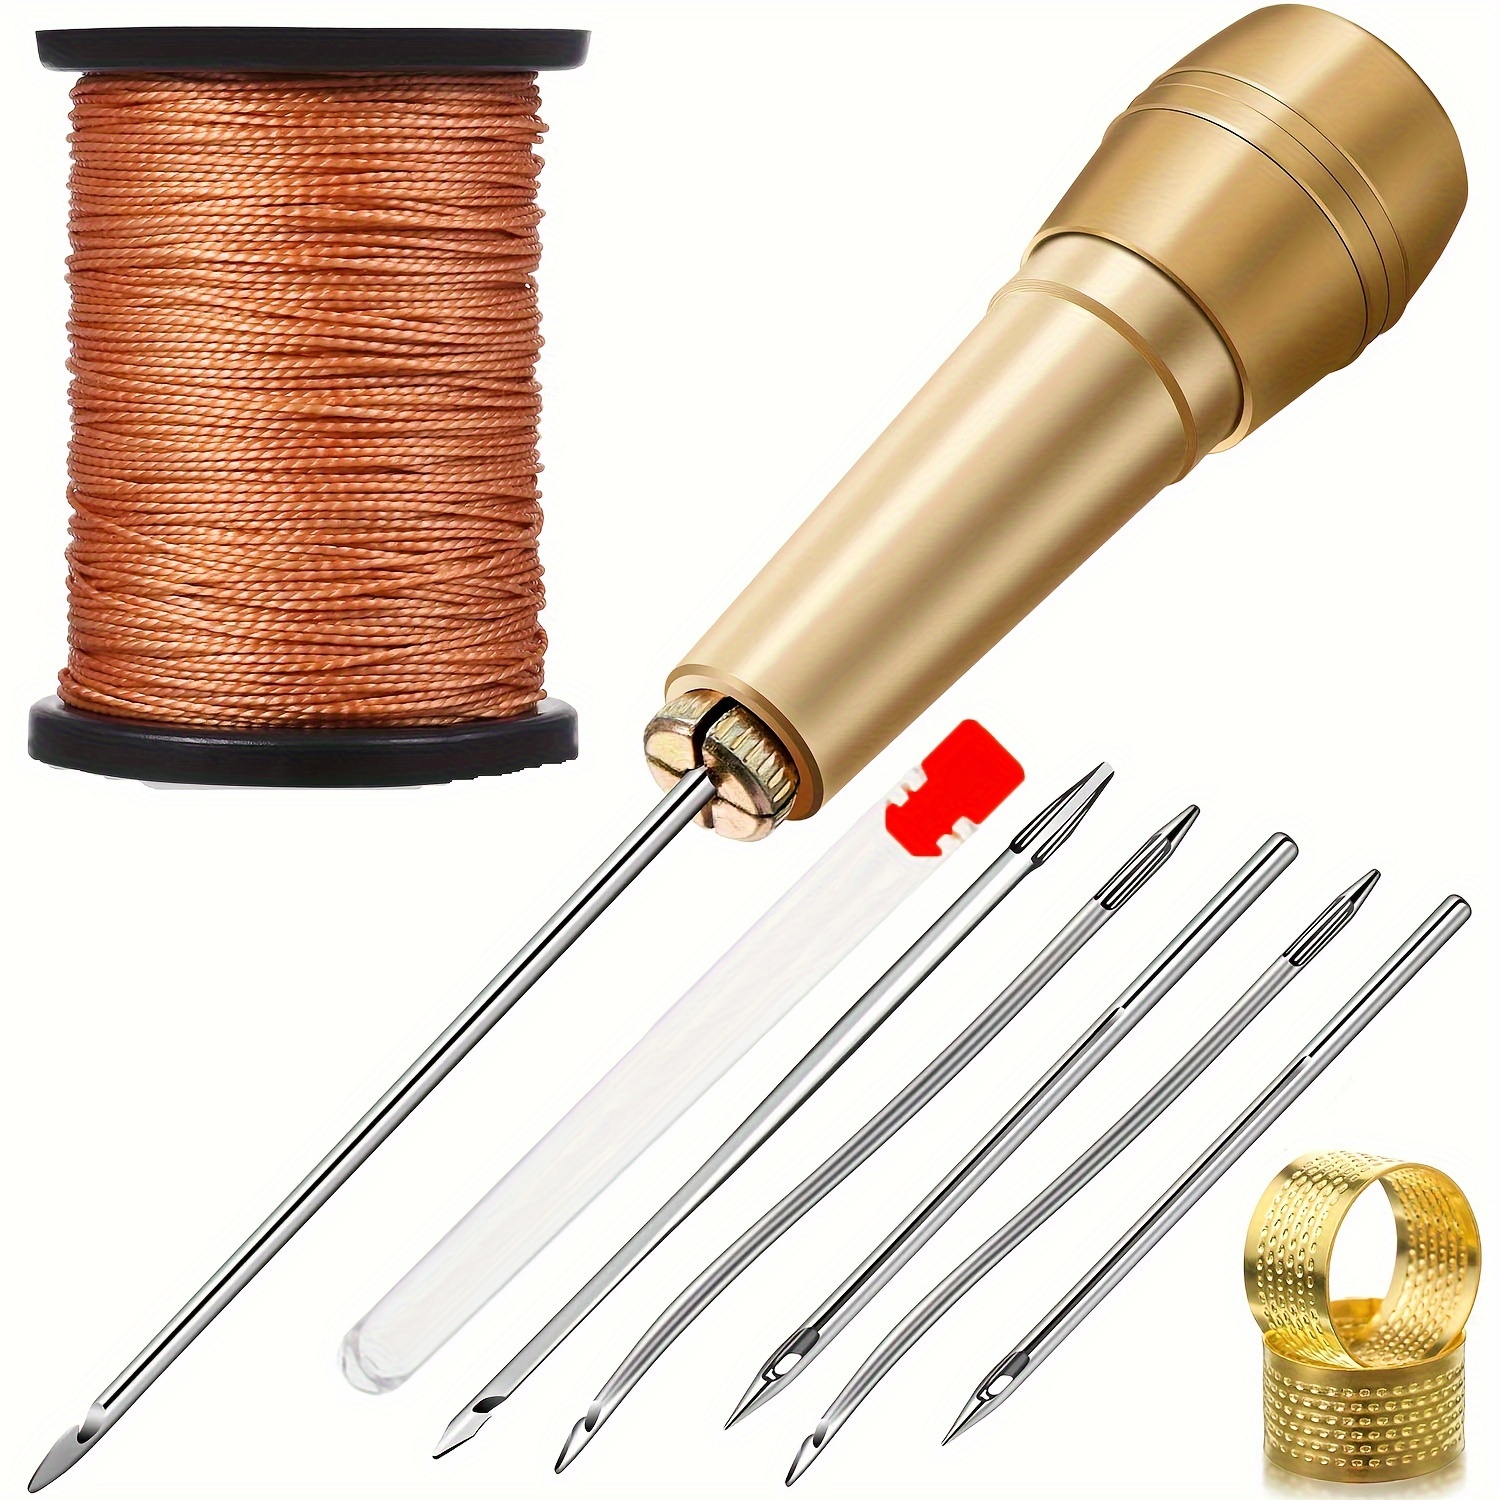 

Leather Sewing Kit Diy Leather Sewing Awl Needle With Copper Handle Set Leather Canvas Tent Shoes Repairing Tool W/nylon Thread